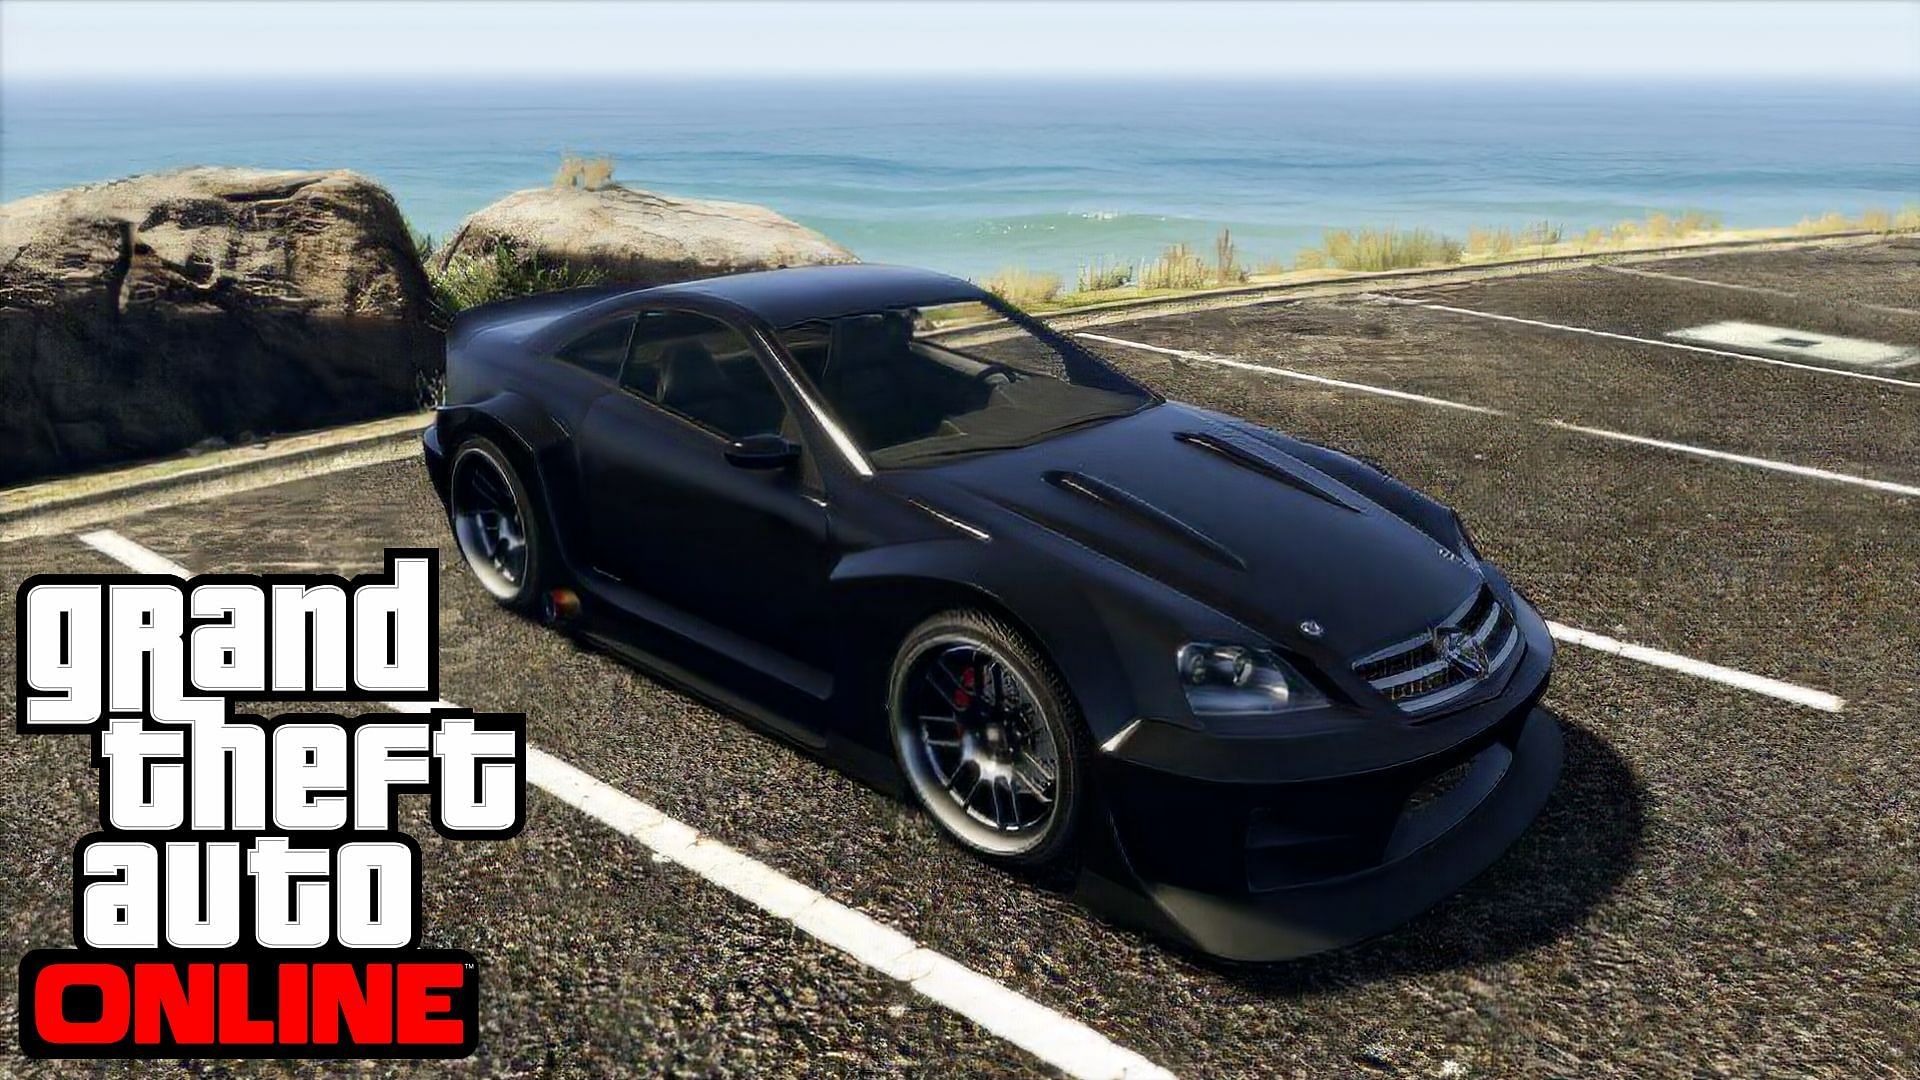 Among the best cars in GTA Online, there are some of these which are overlooked. (Image via GTABase)